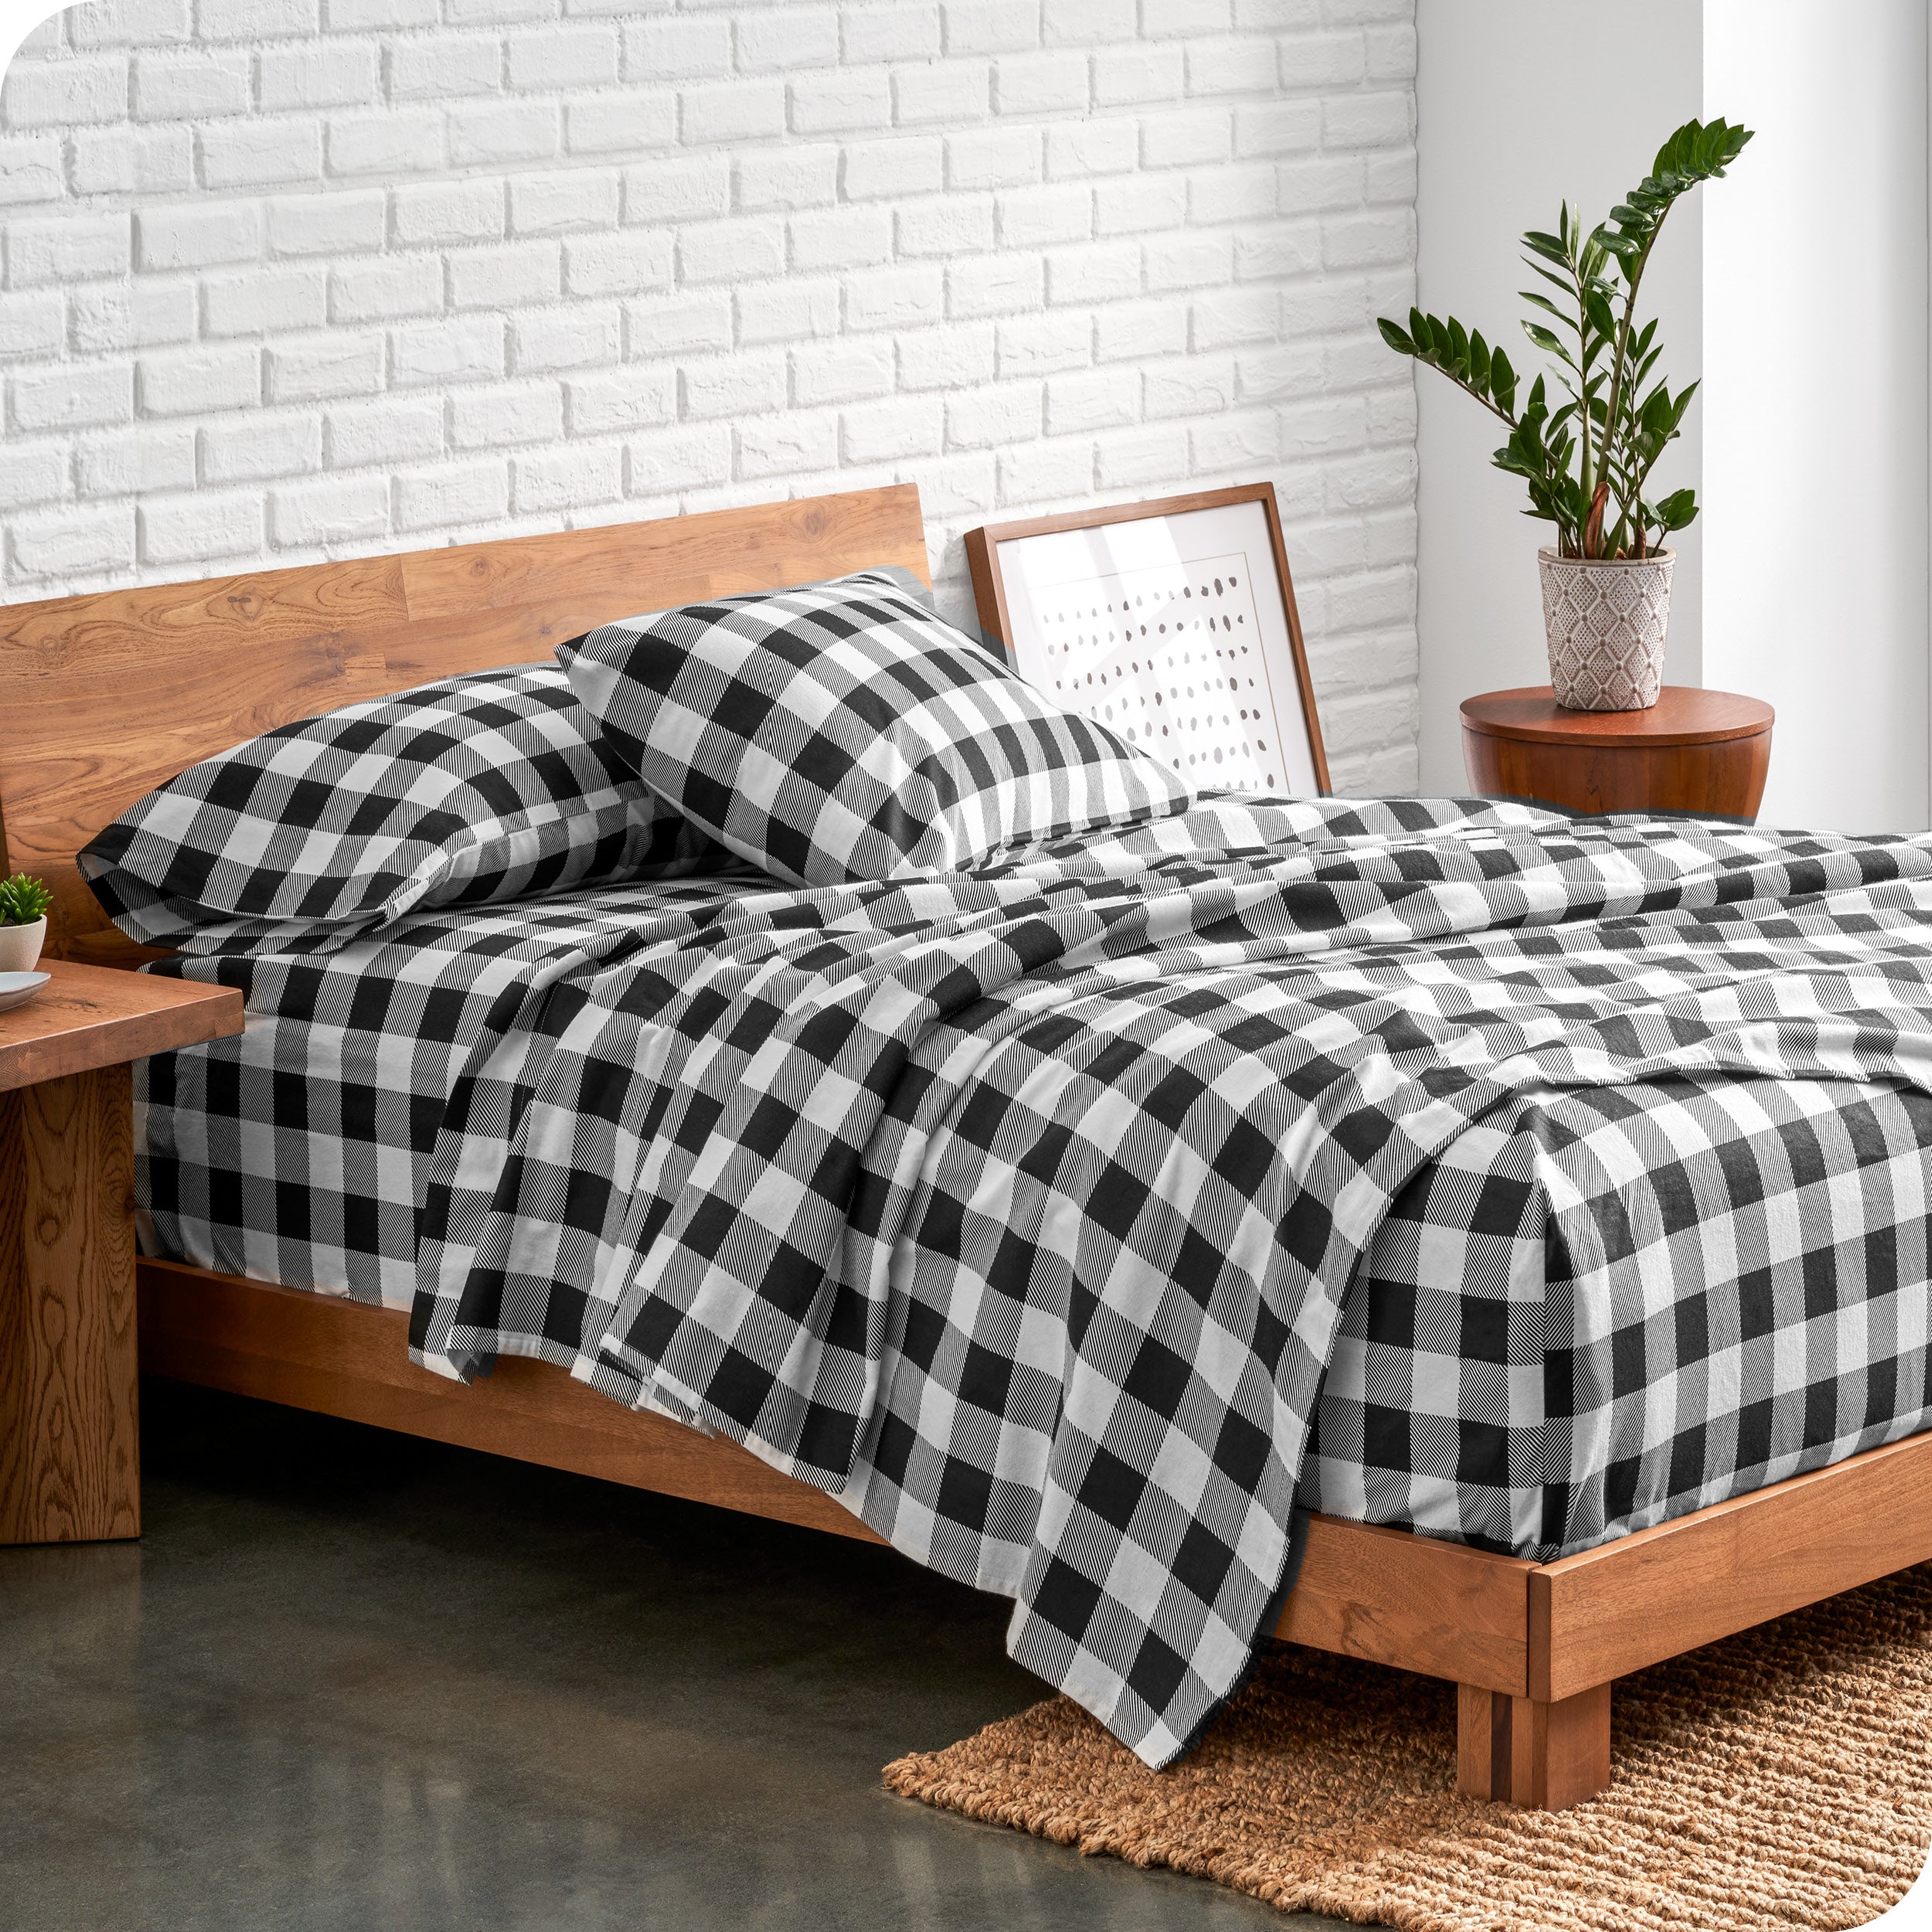 A bed made with printed flannel sheets